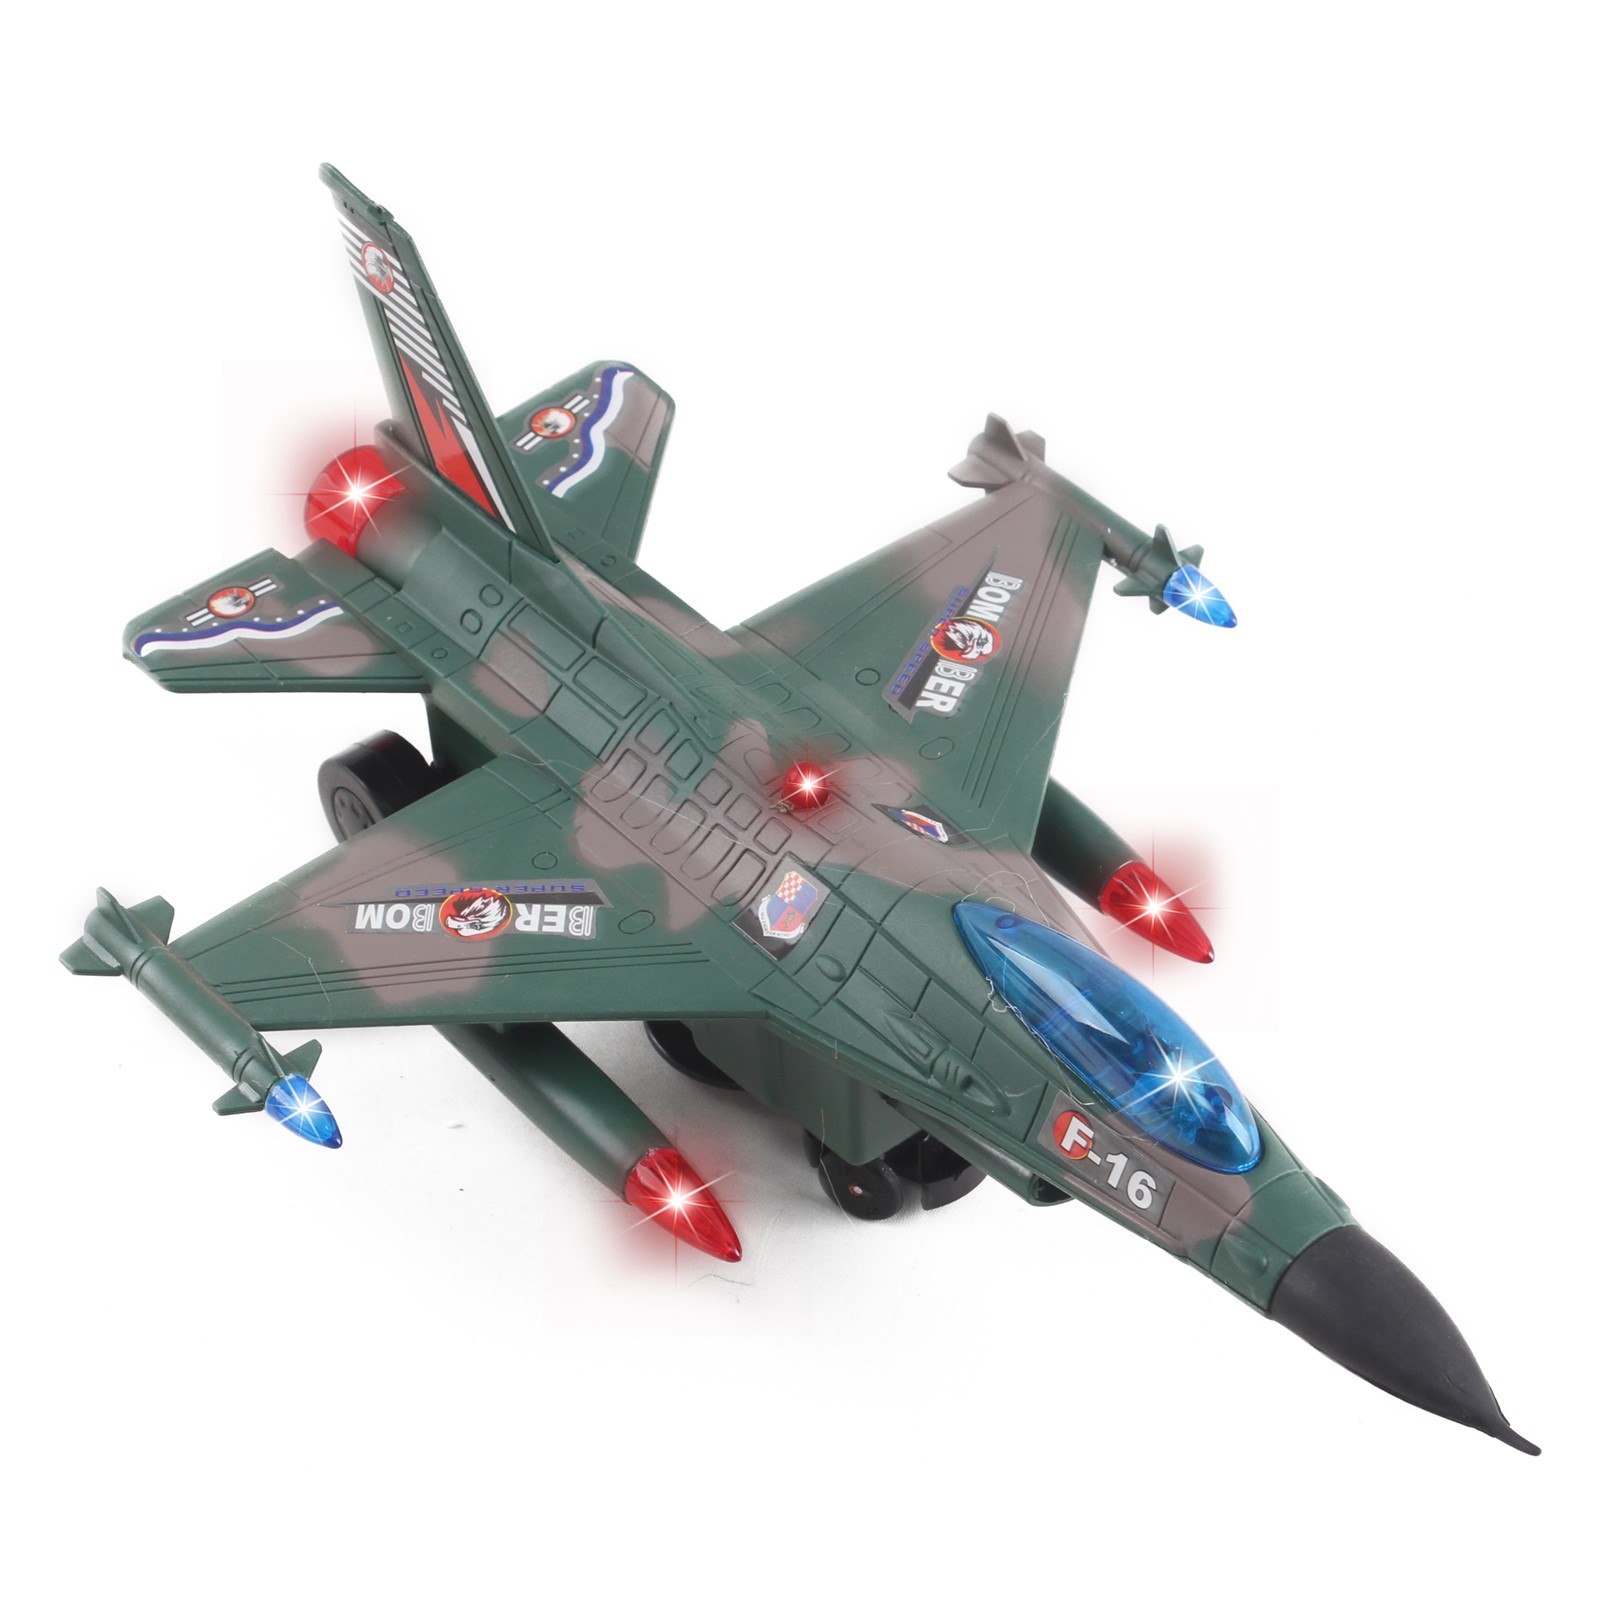 Toy Army Air Force Fighter Jet F16 Battery Operated Kid\'s Bump and Go Toy Plane With Flashing Lights And Sounds Bumps Into Something and Will Change Direction Perfect For Boys And Girls (Green)